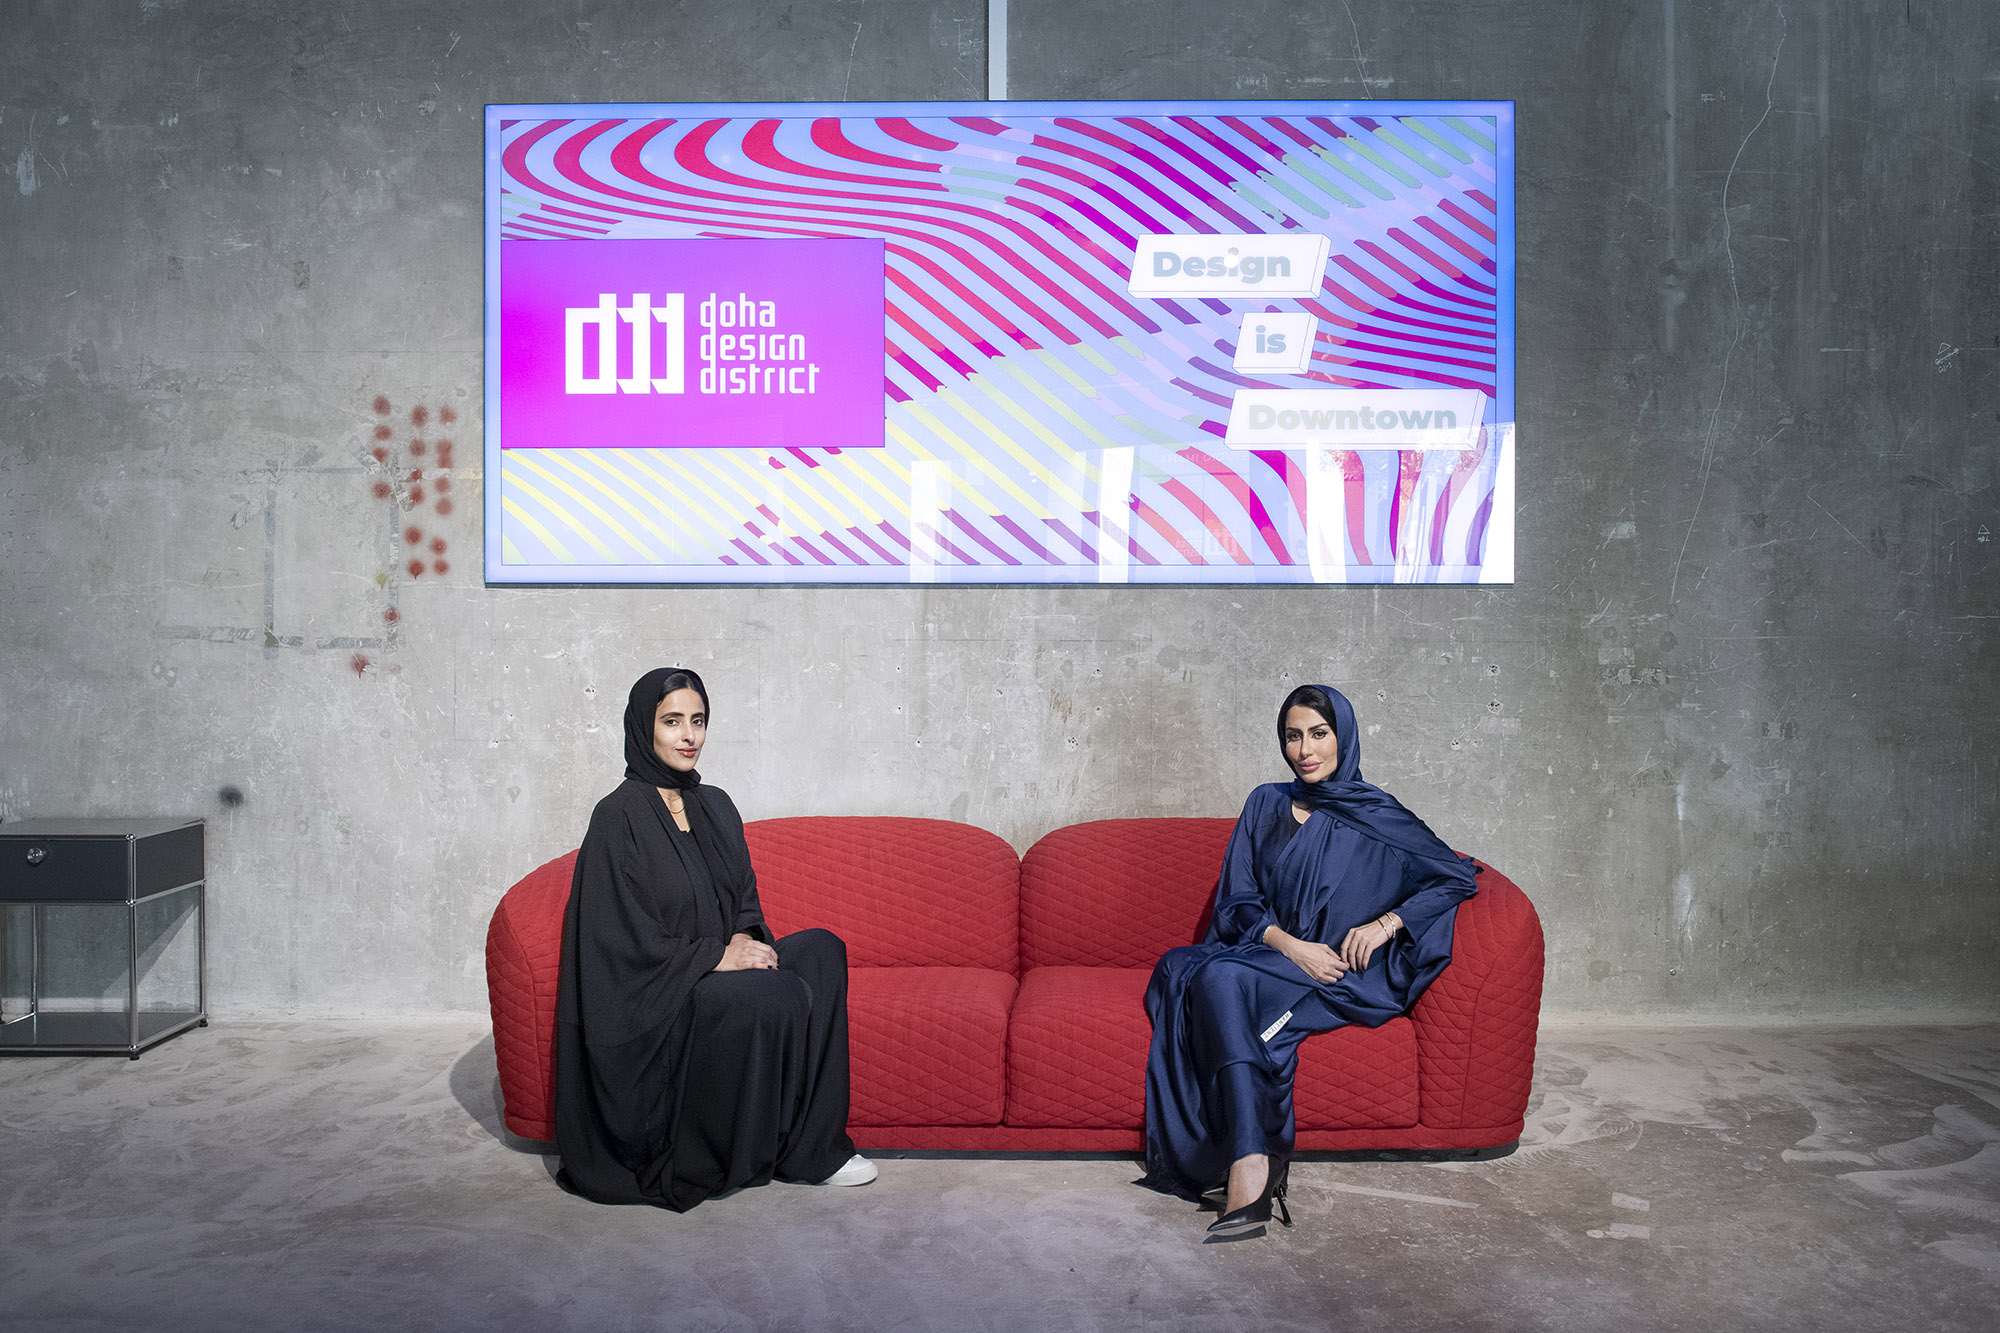 Web Design Is Downtown An Exhibition Organized By Naila Al Thani (l) And Shaikha Al Sulaiti (r) From Doha Design District, Hopes To Make Design Accessible To The General The Public.